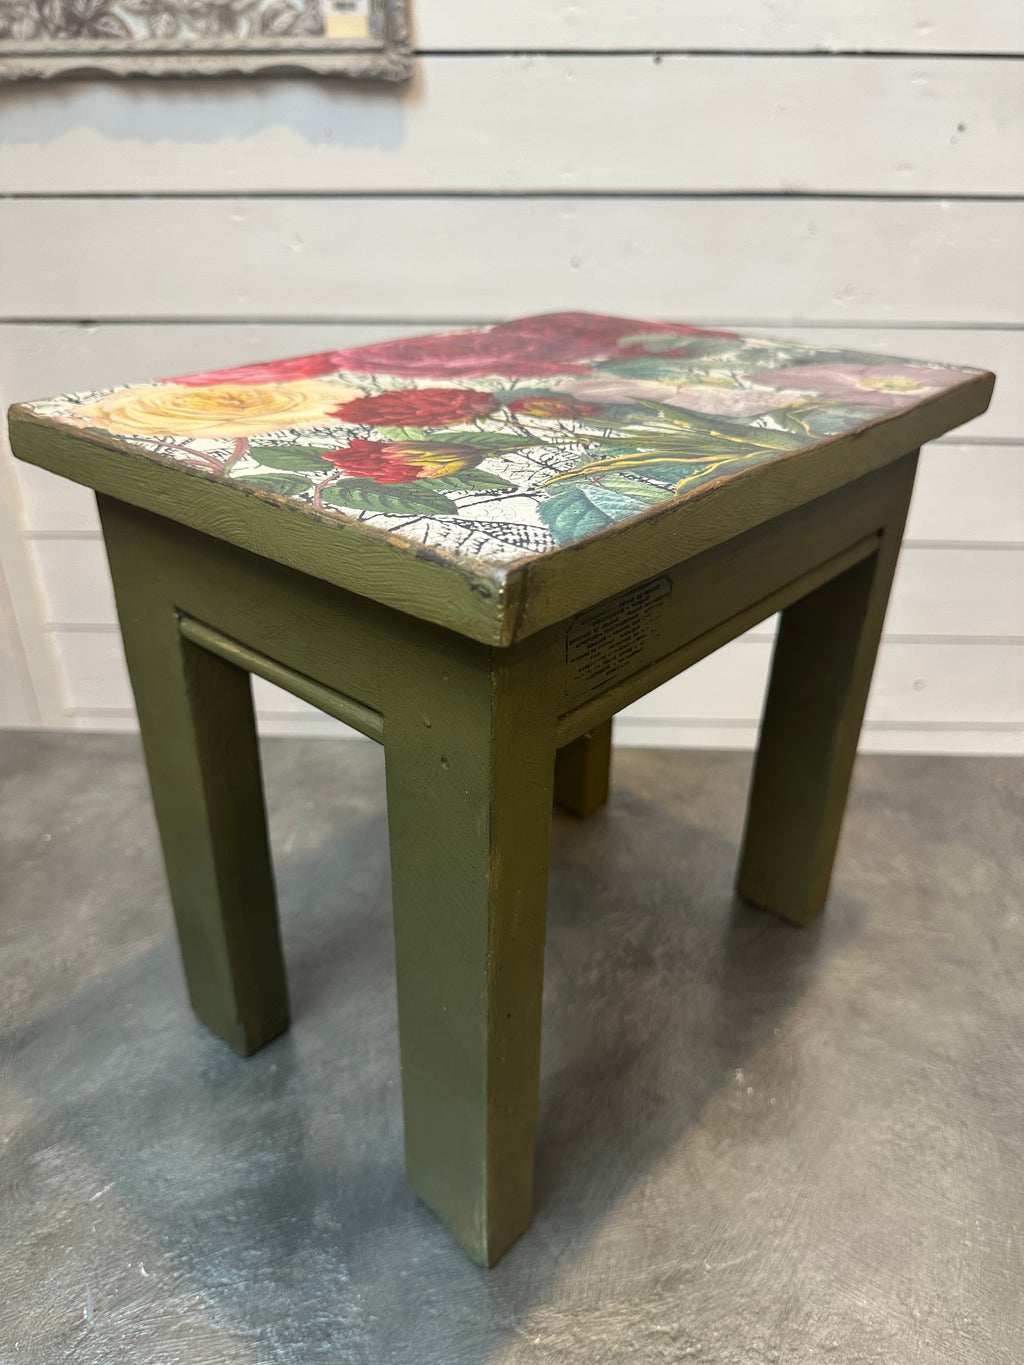 Floral Olea (olive) small table riser